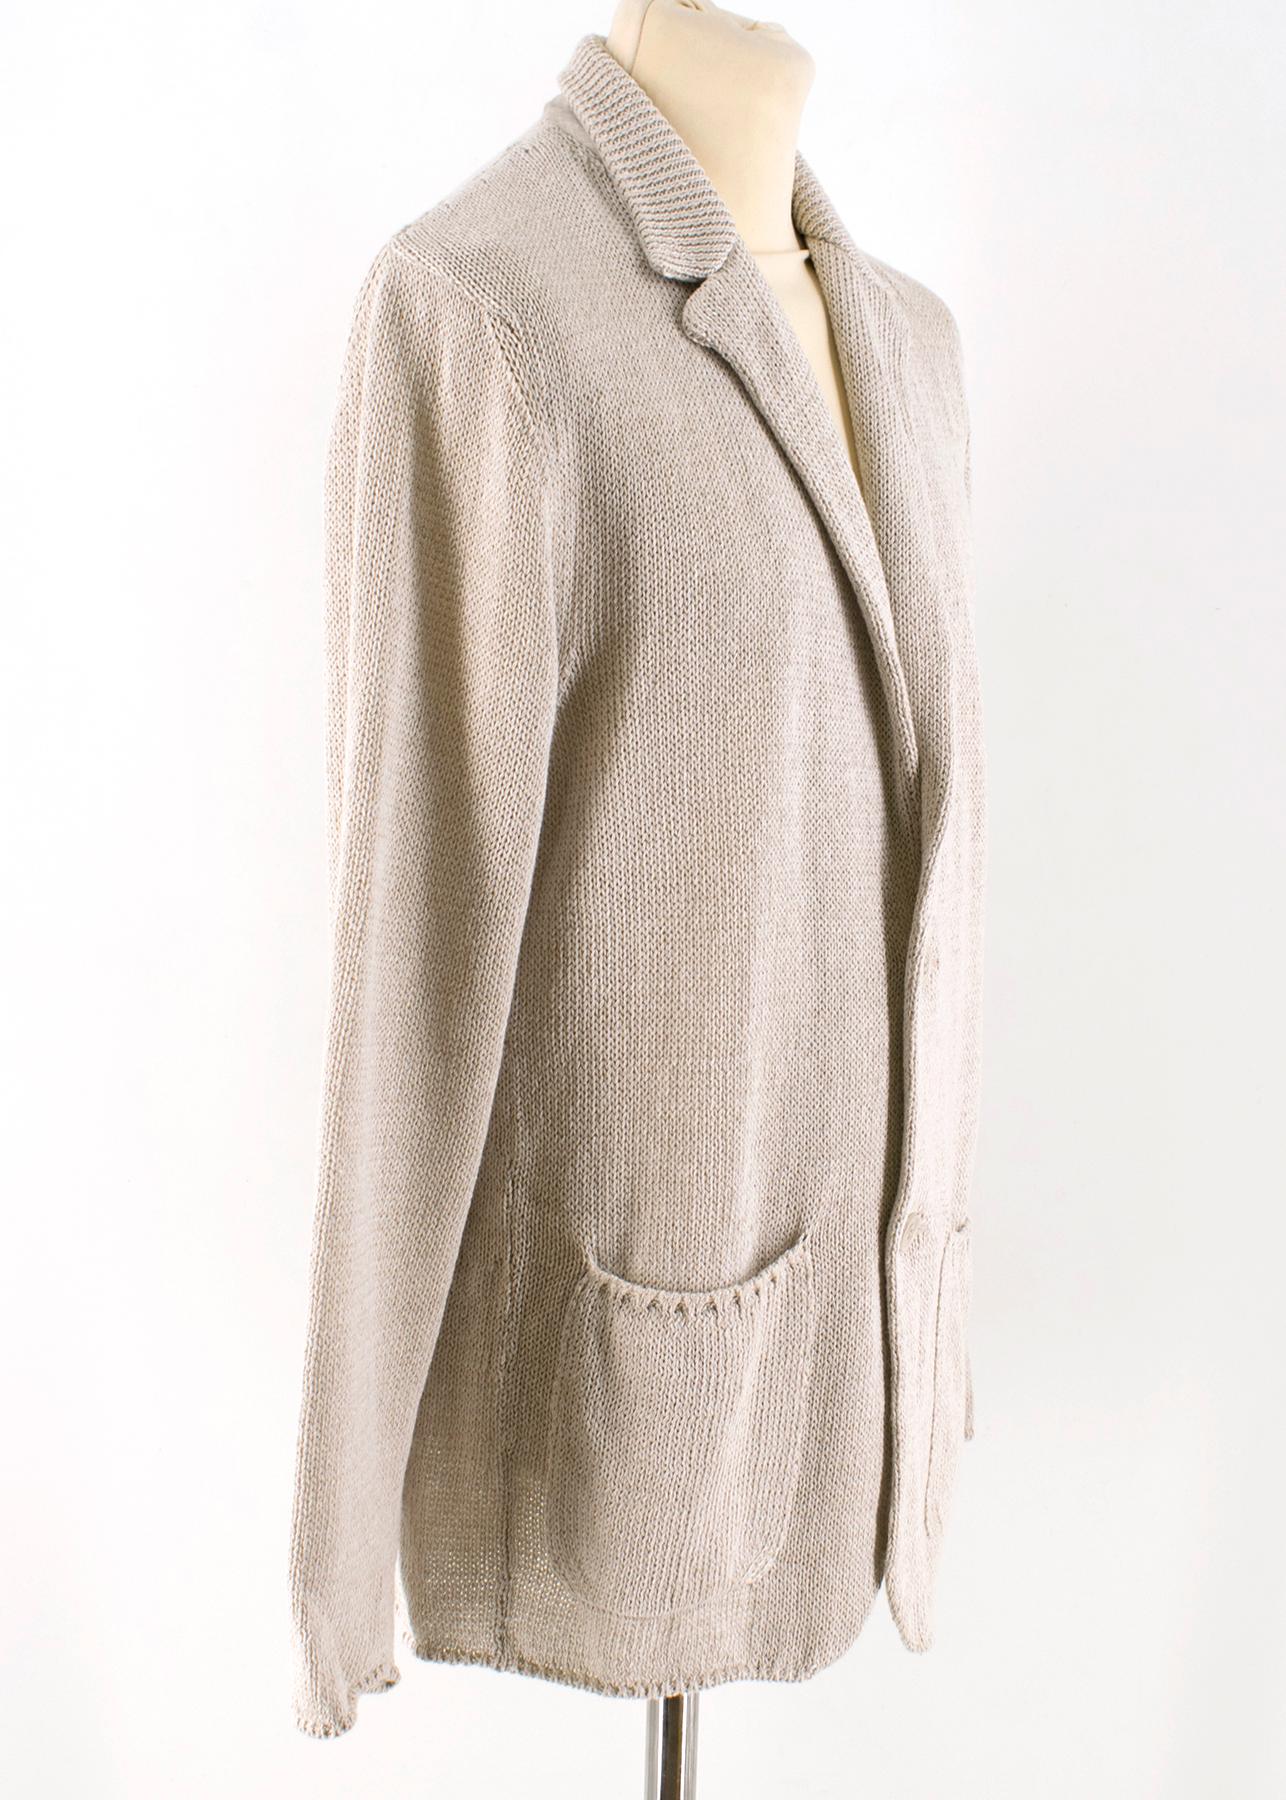 Loro Piana Beige Knit Cardigan 

- Beige Knit Cardigan 
- Point collar 
- Button fastening closure at front 
- Dual front slip pockets

Please note, these items are pre-owned and may show some signs of storage, even when unworn and unused. This is